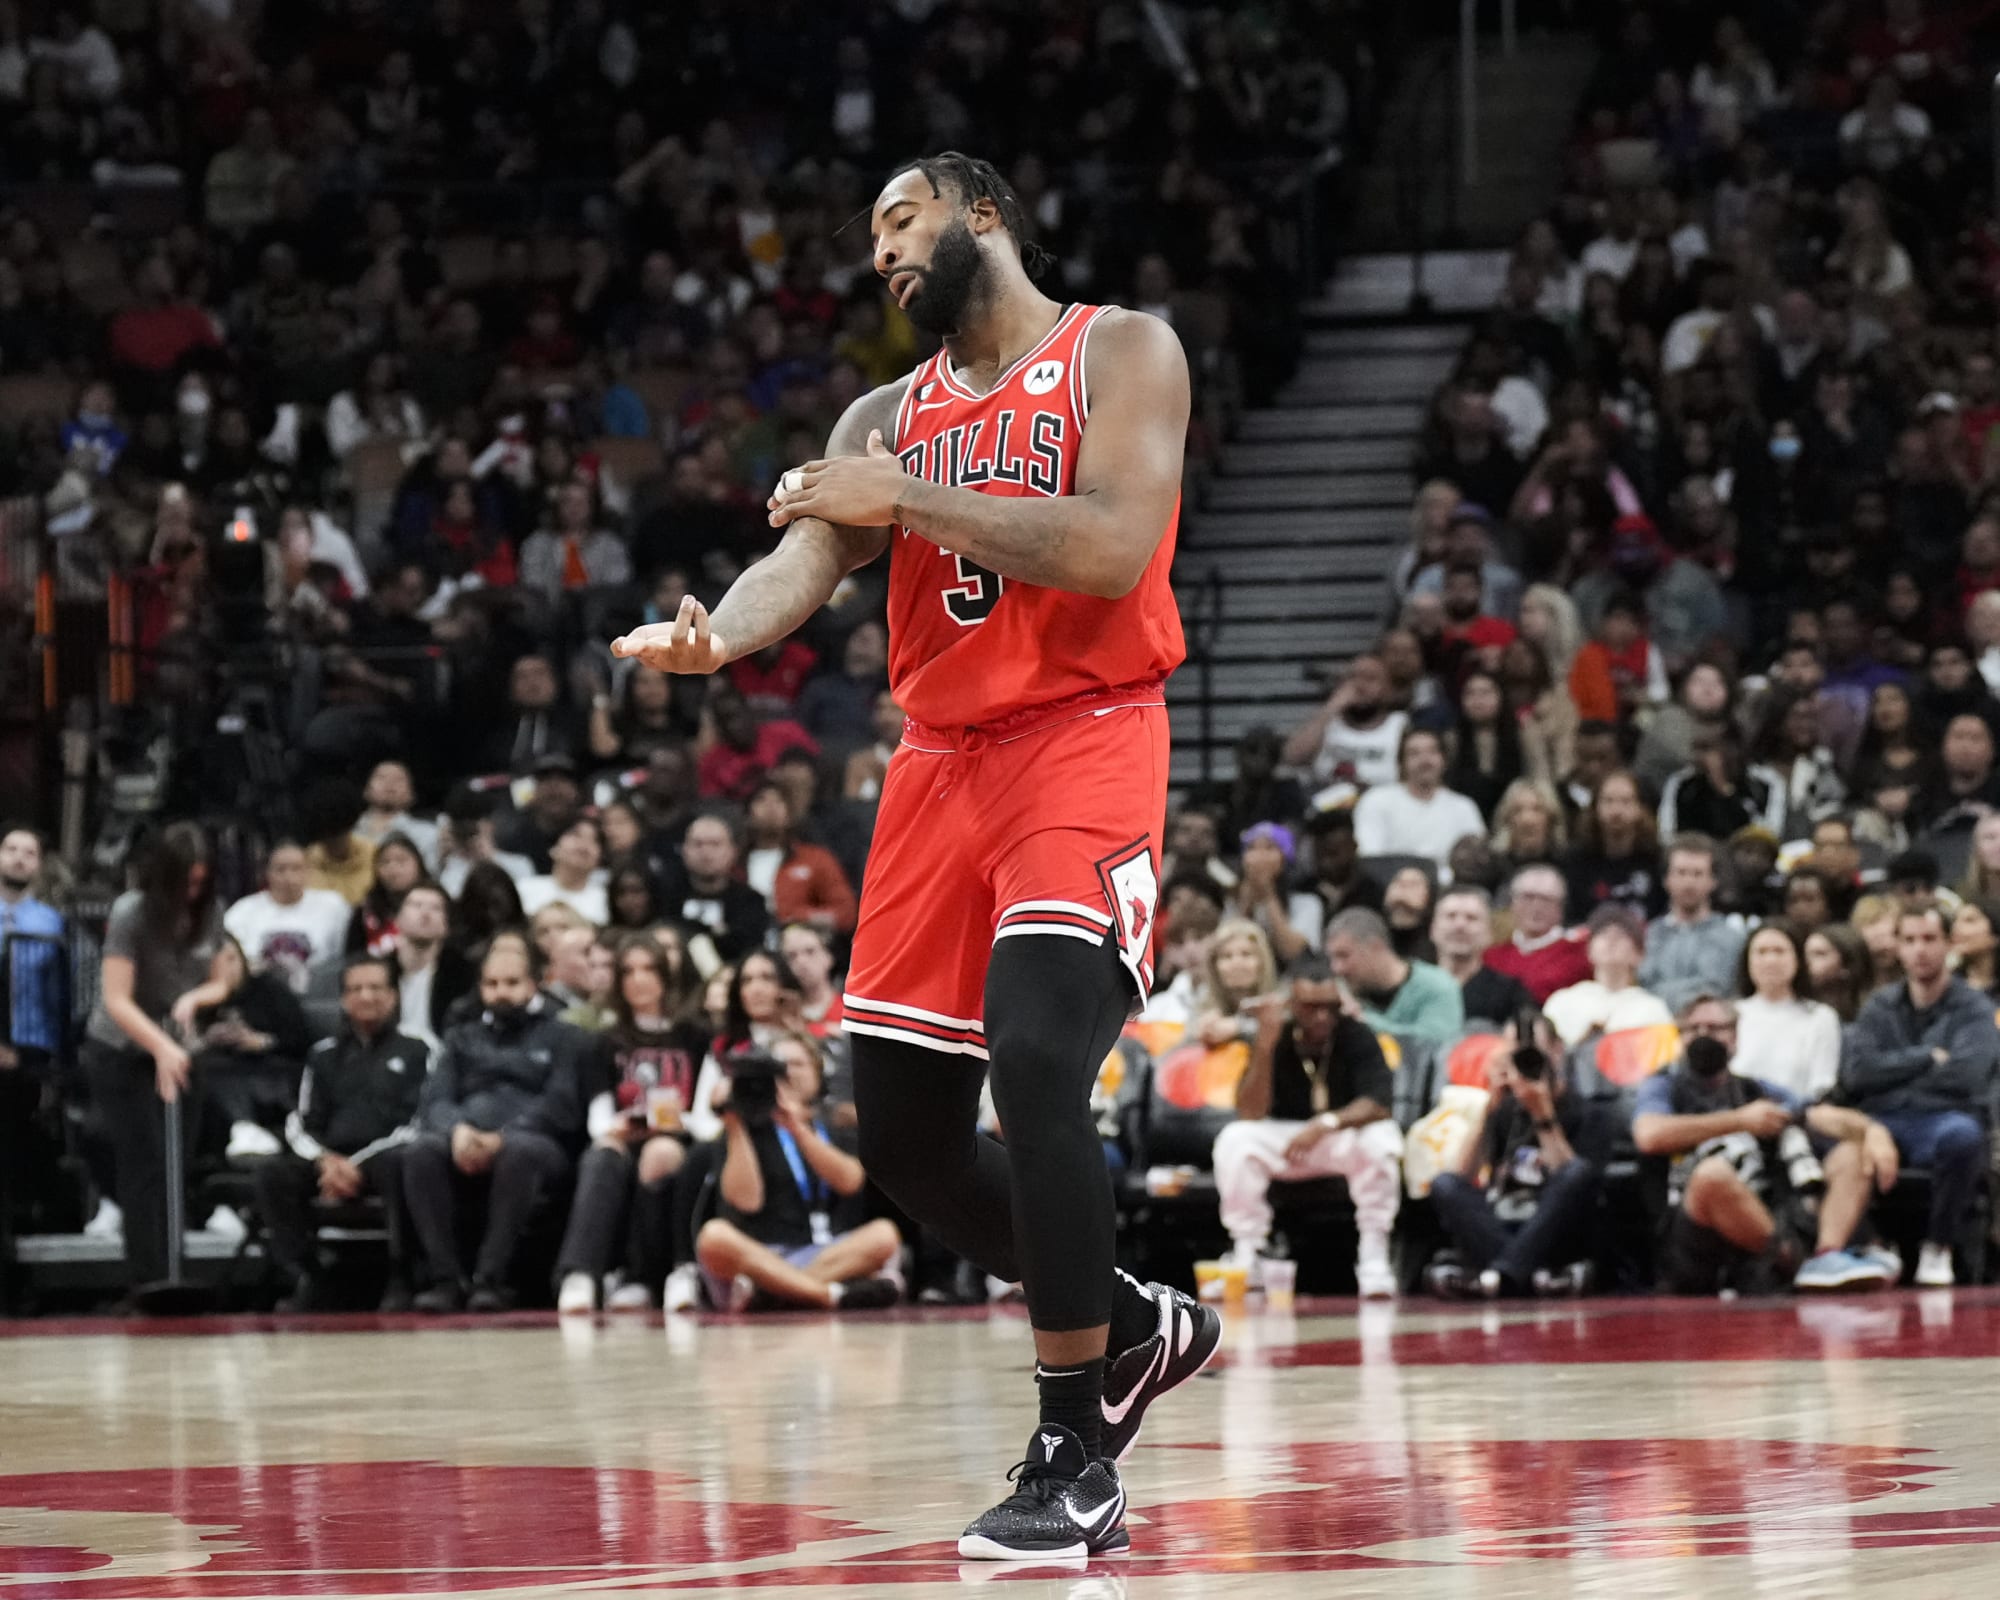 “Bulls building Shanghai sharks in NBA” - NBA fans react to Andre Drummond  running it back in Chicago after re-signing